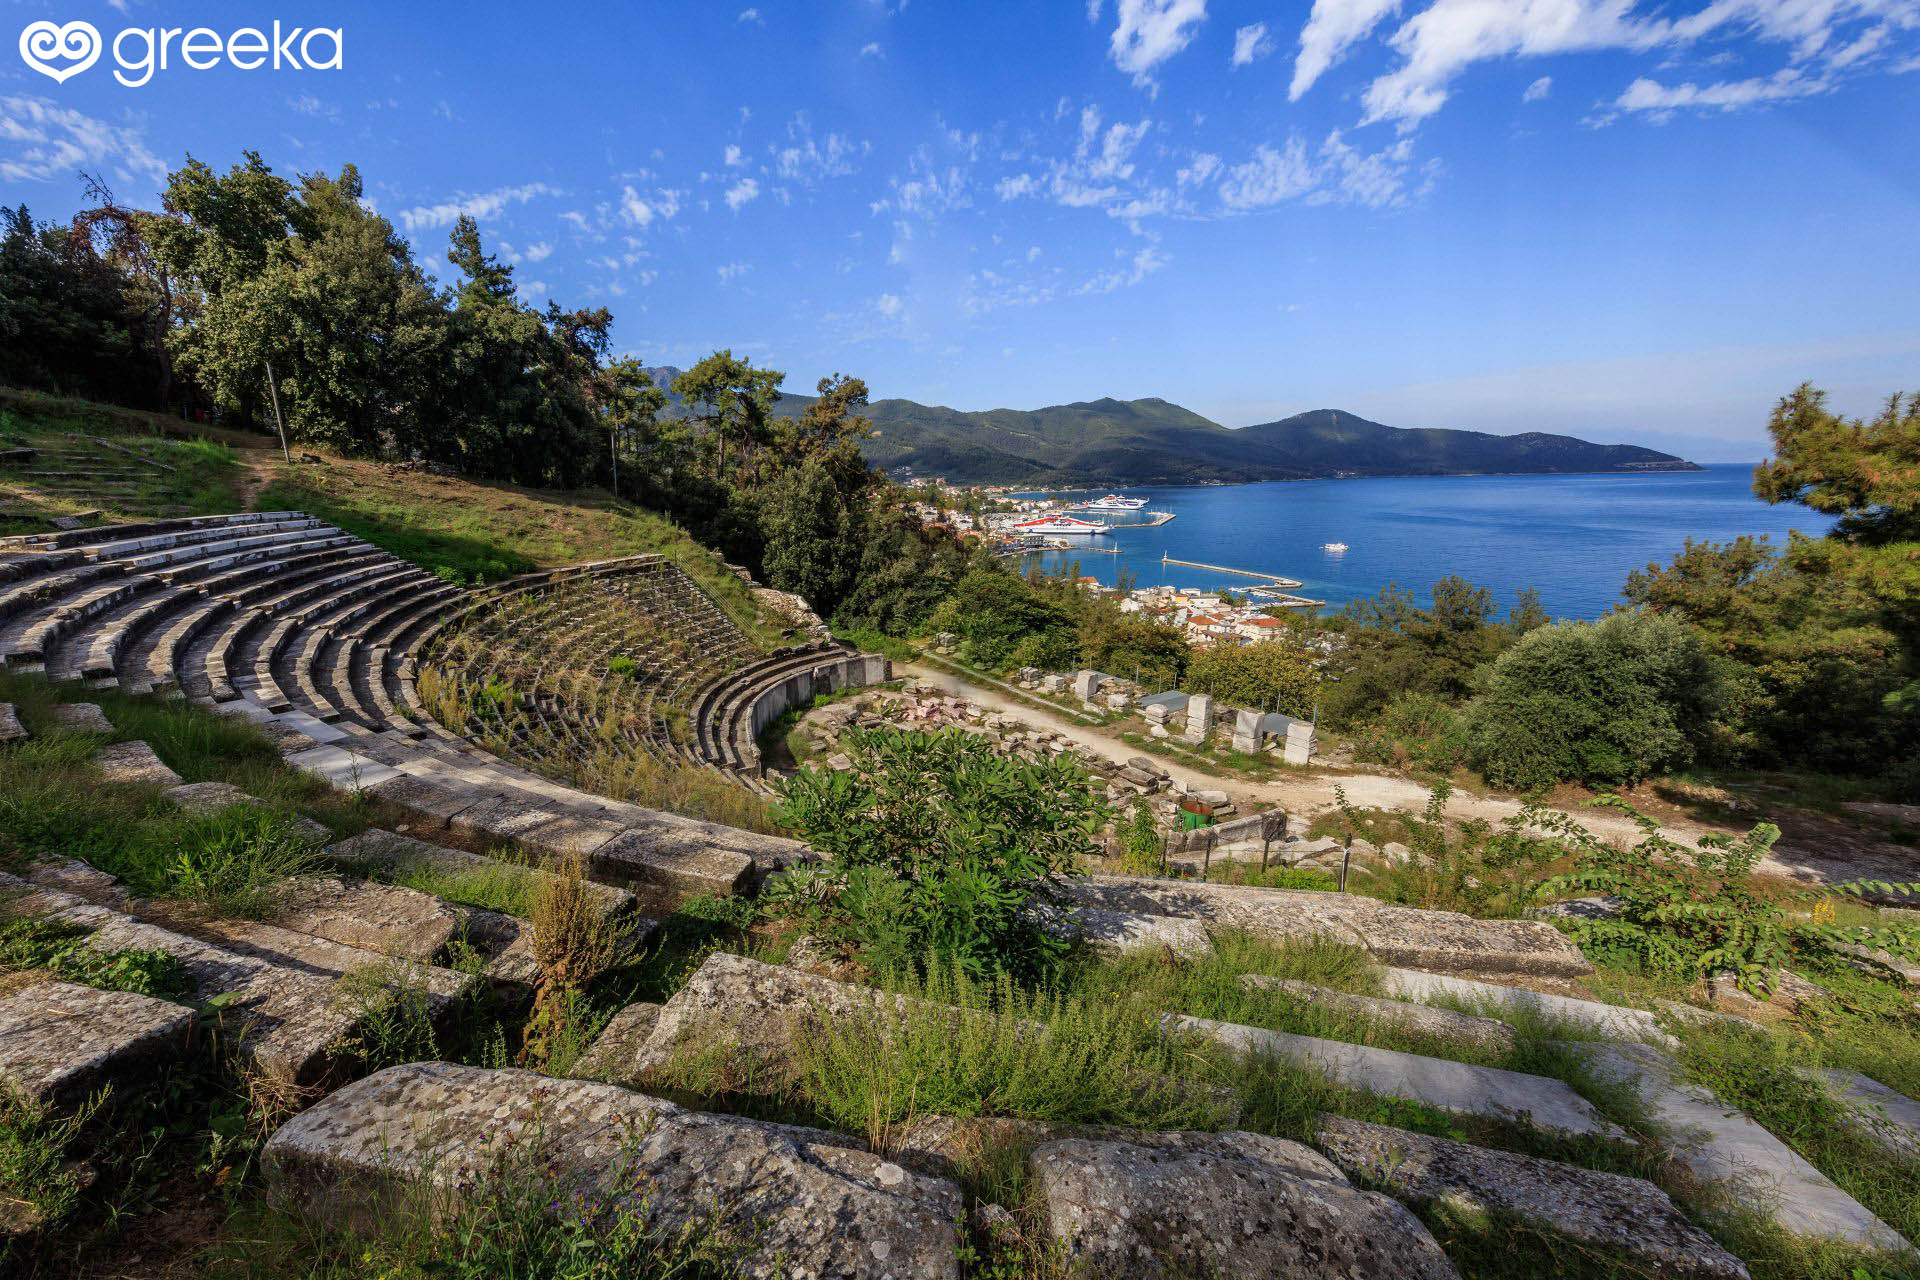 excursions in thassos